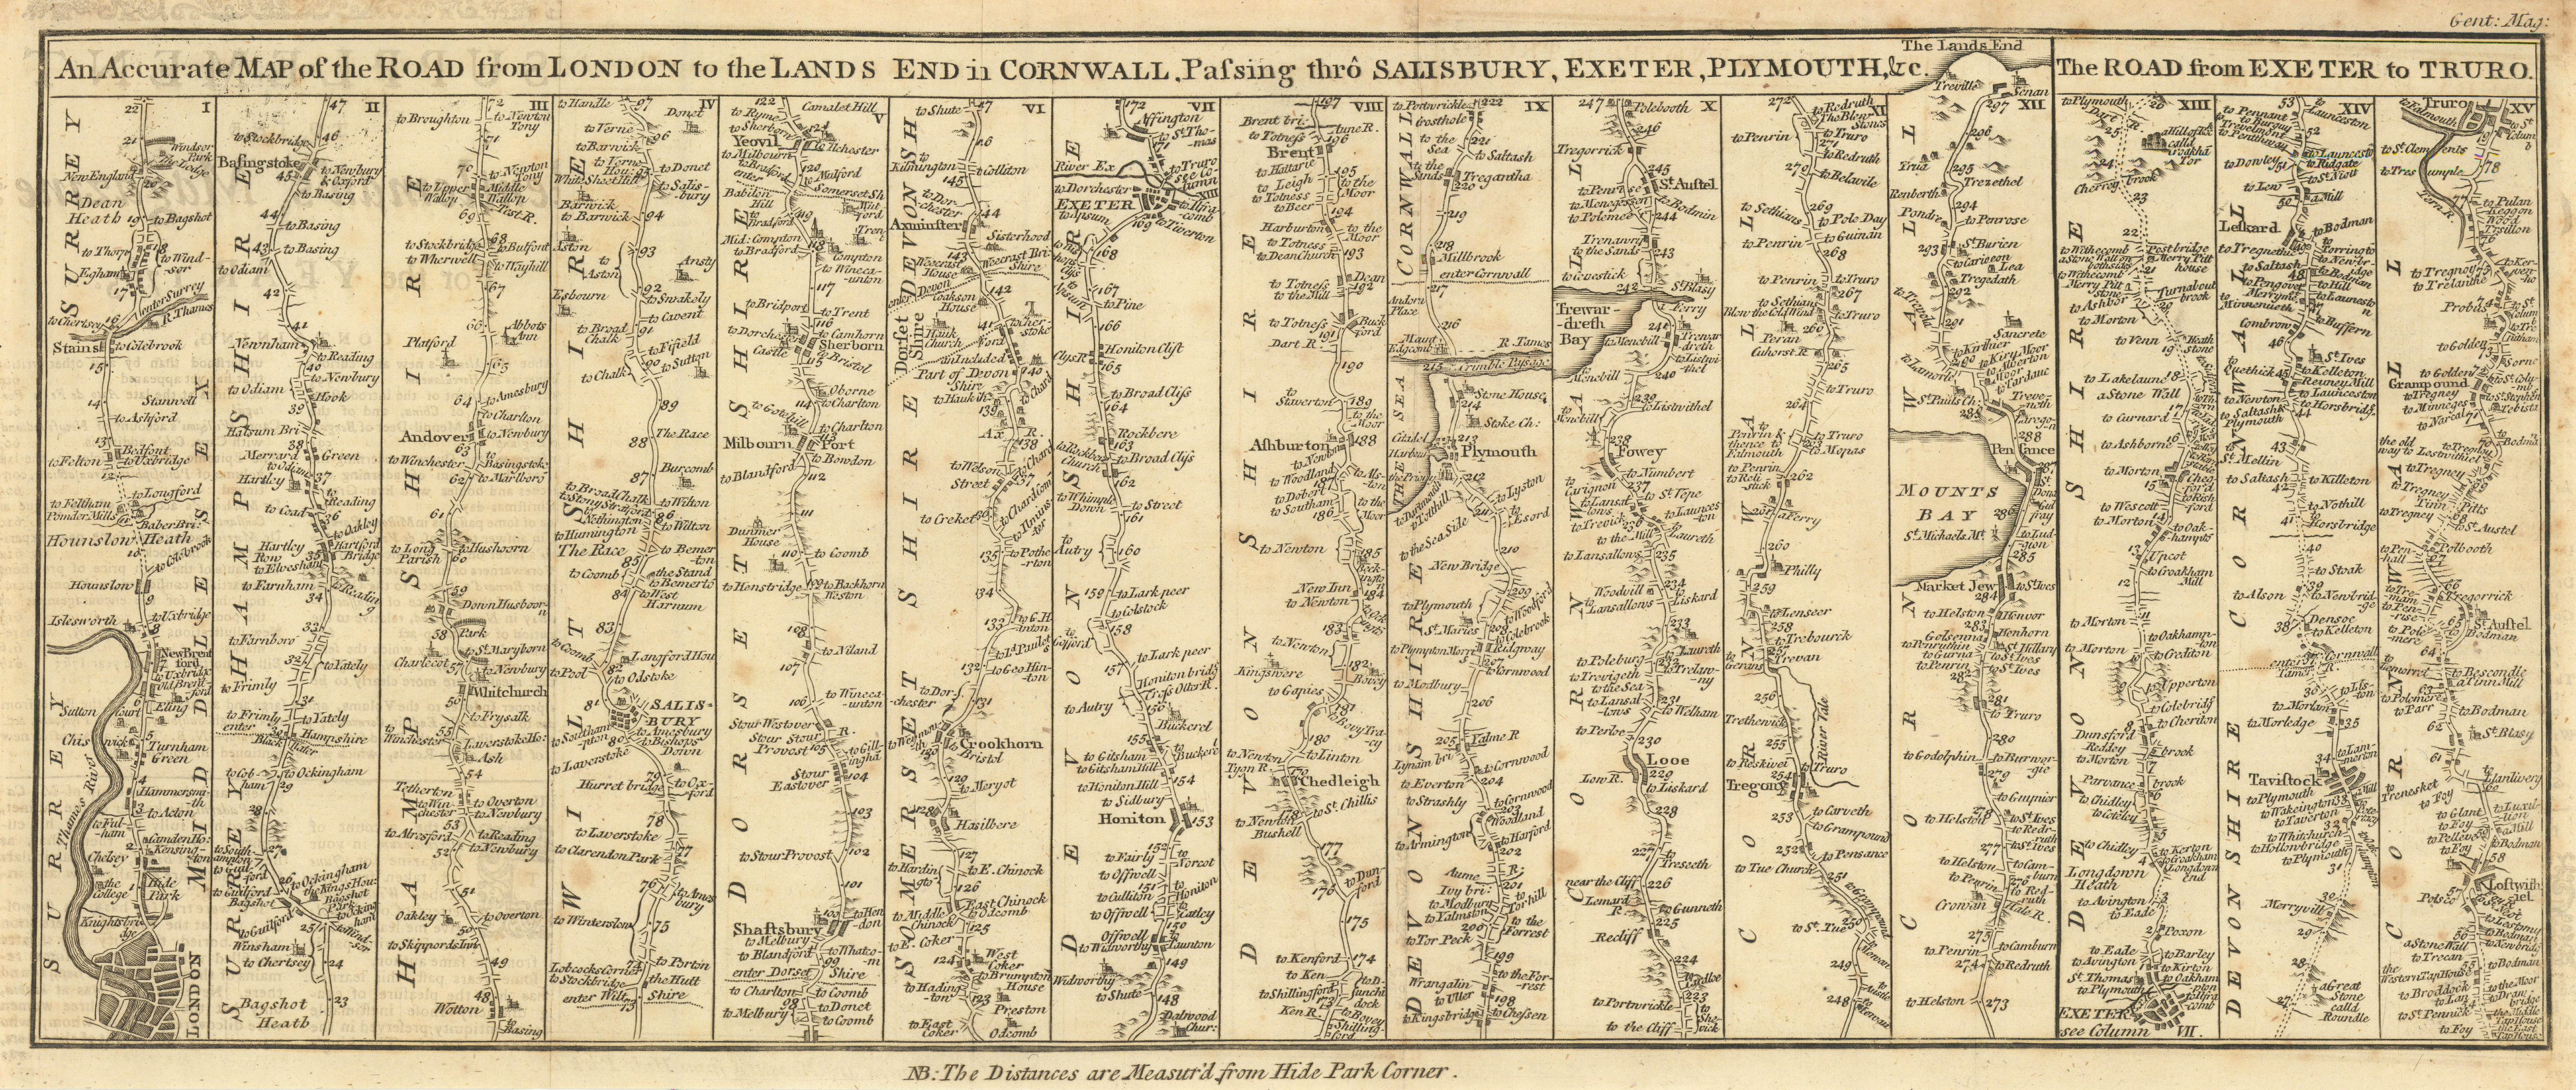 Associate Product The Road from London to Land's End Salisbury Exeter Plymouth… GENTS MAG 1765 map